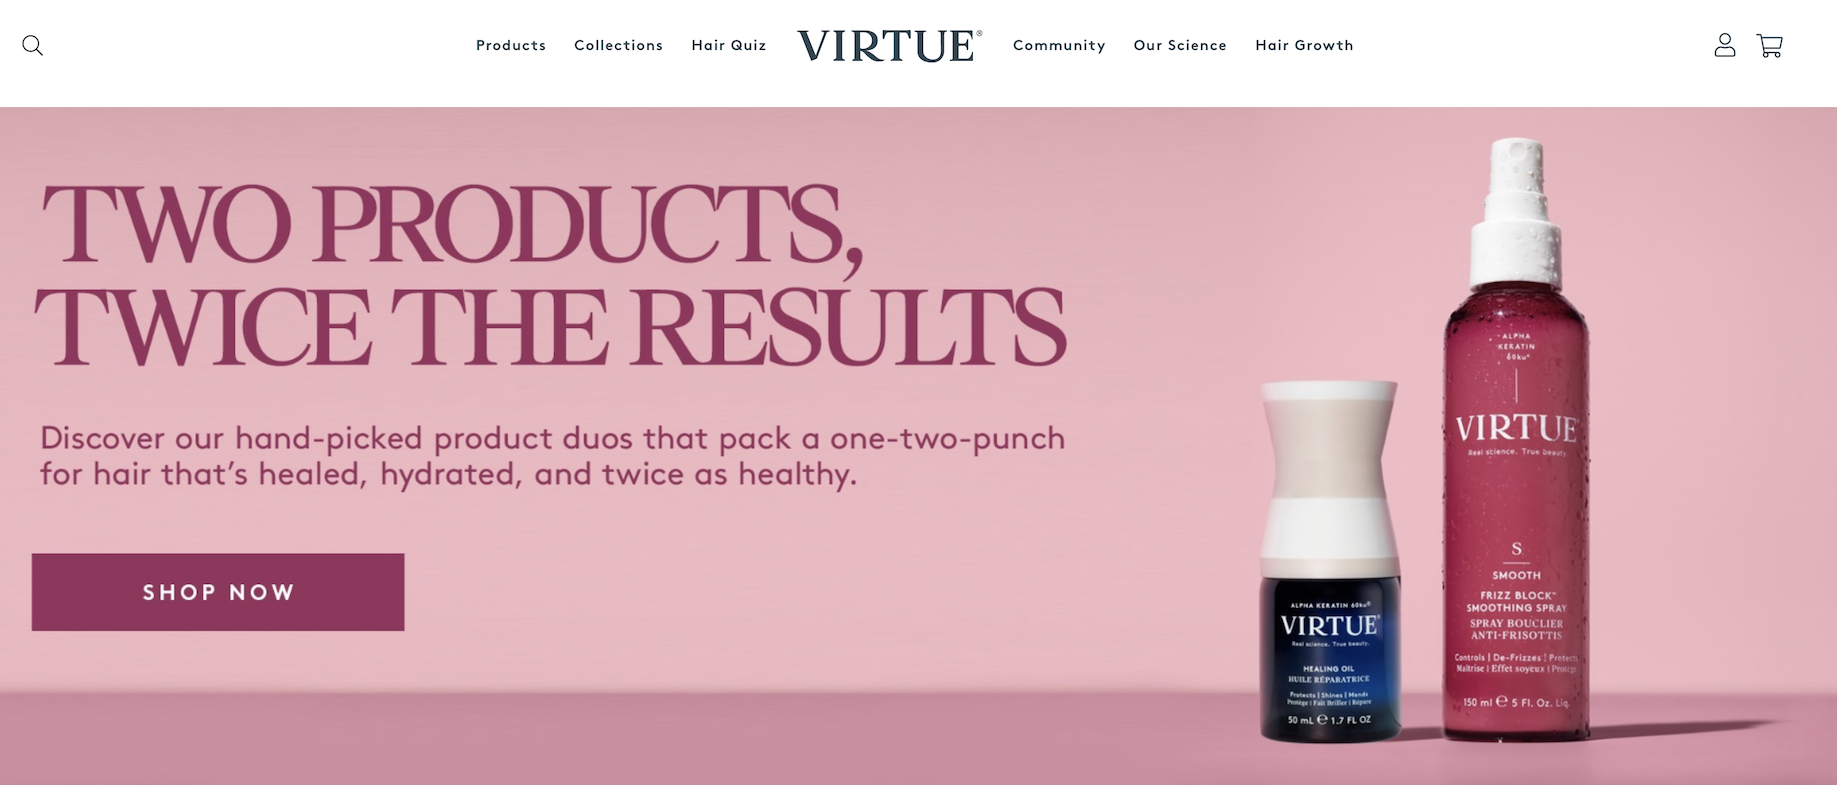 US Biotech Haircare Brand Virtue Labs Receives Investment from Combe